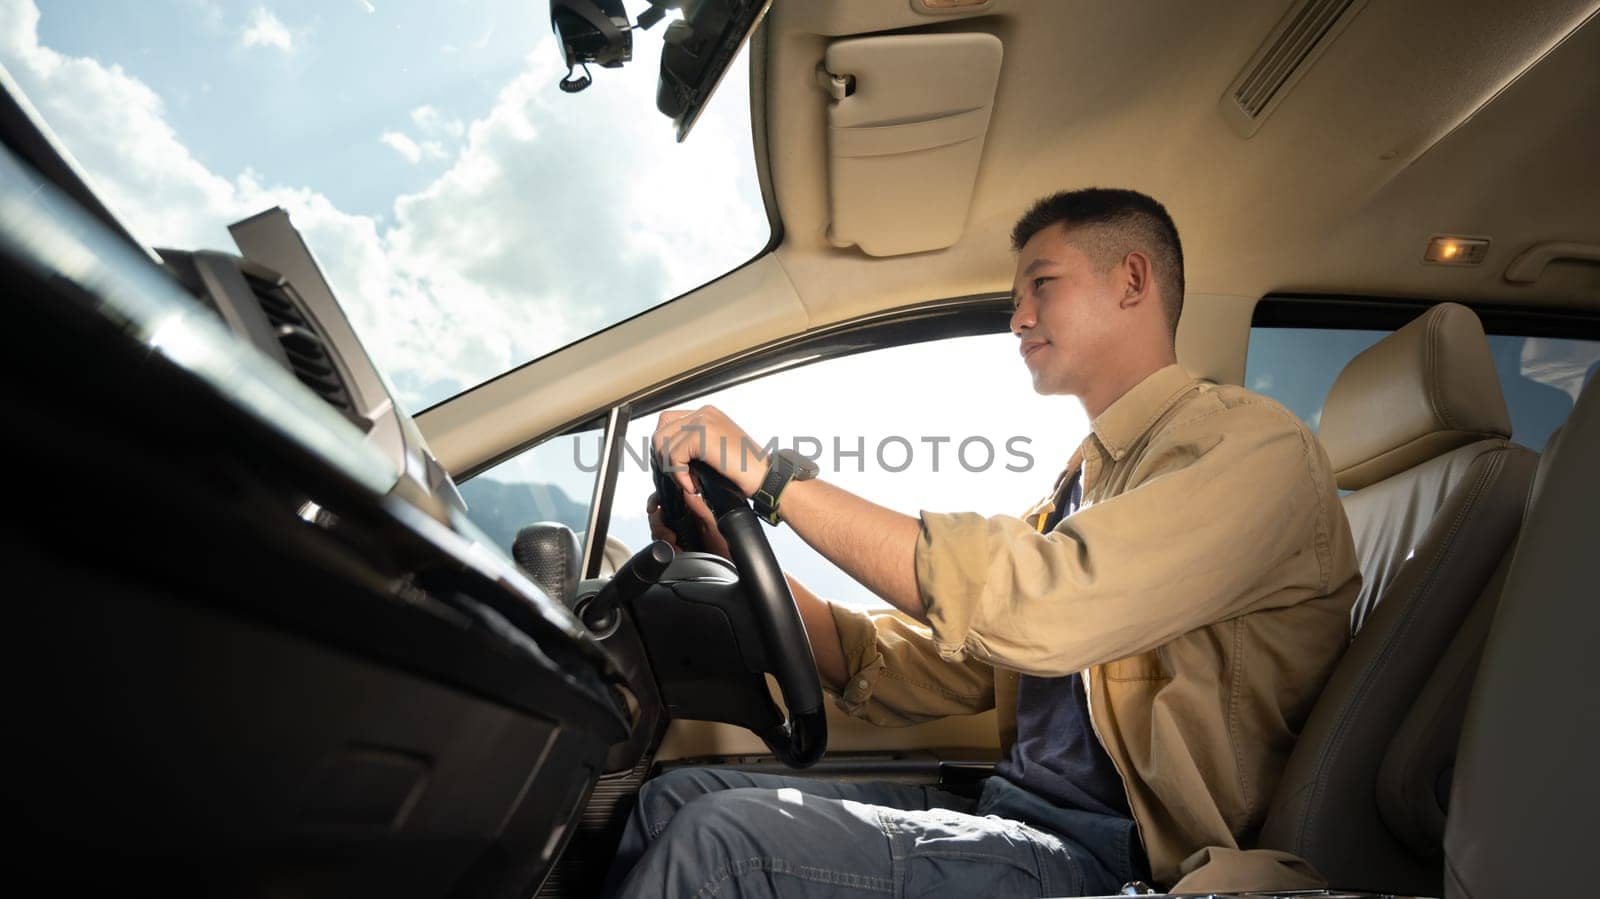 Handsome man driving car enjoying road trip on vacation. Transport, summer vacation and holiday.